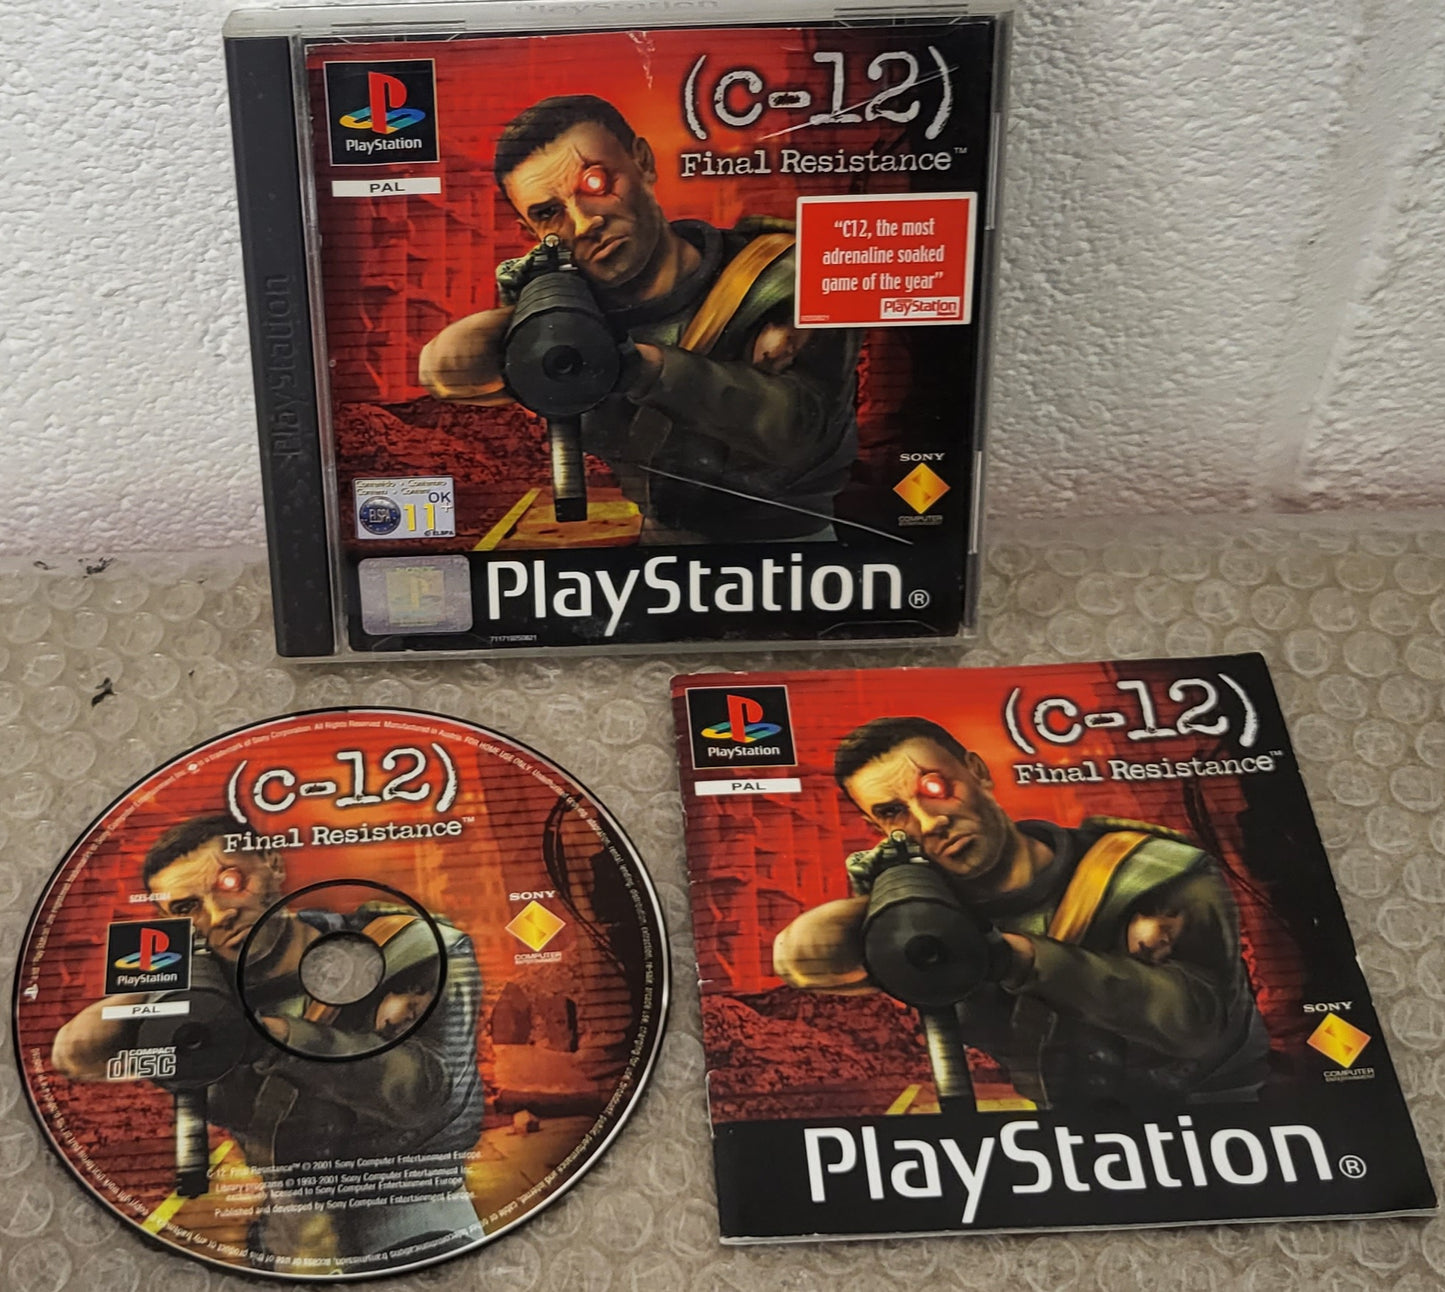 C-12 Final Resistance Sony Playstation 1 (PS1) Game